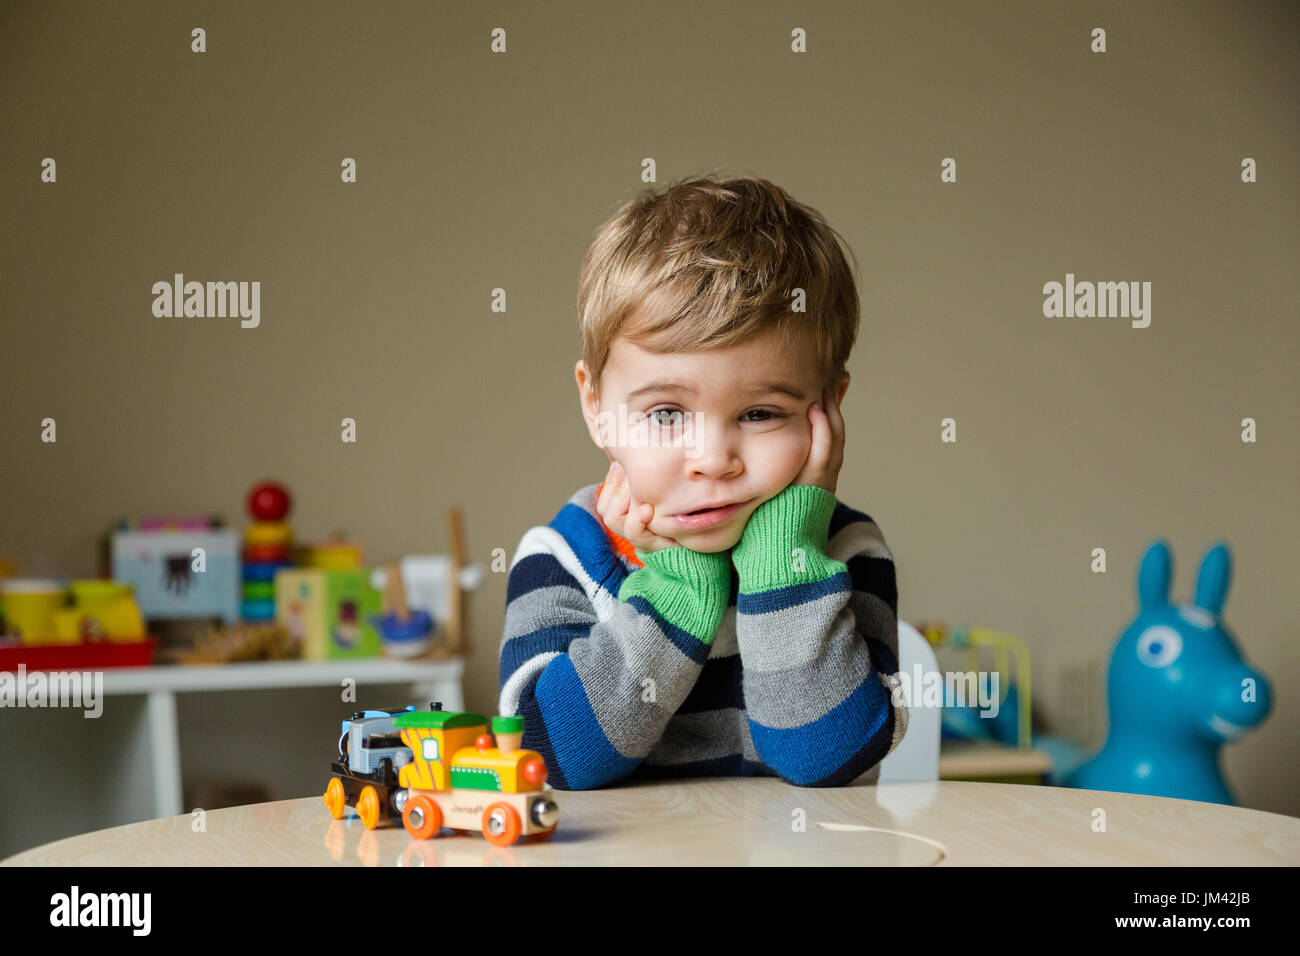 A boy toddler sitting in his playroom leans on his elbows on a table and squishes his cheeks with a look of sadness on his face. Stock Photo